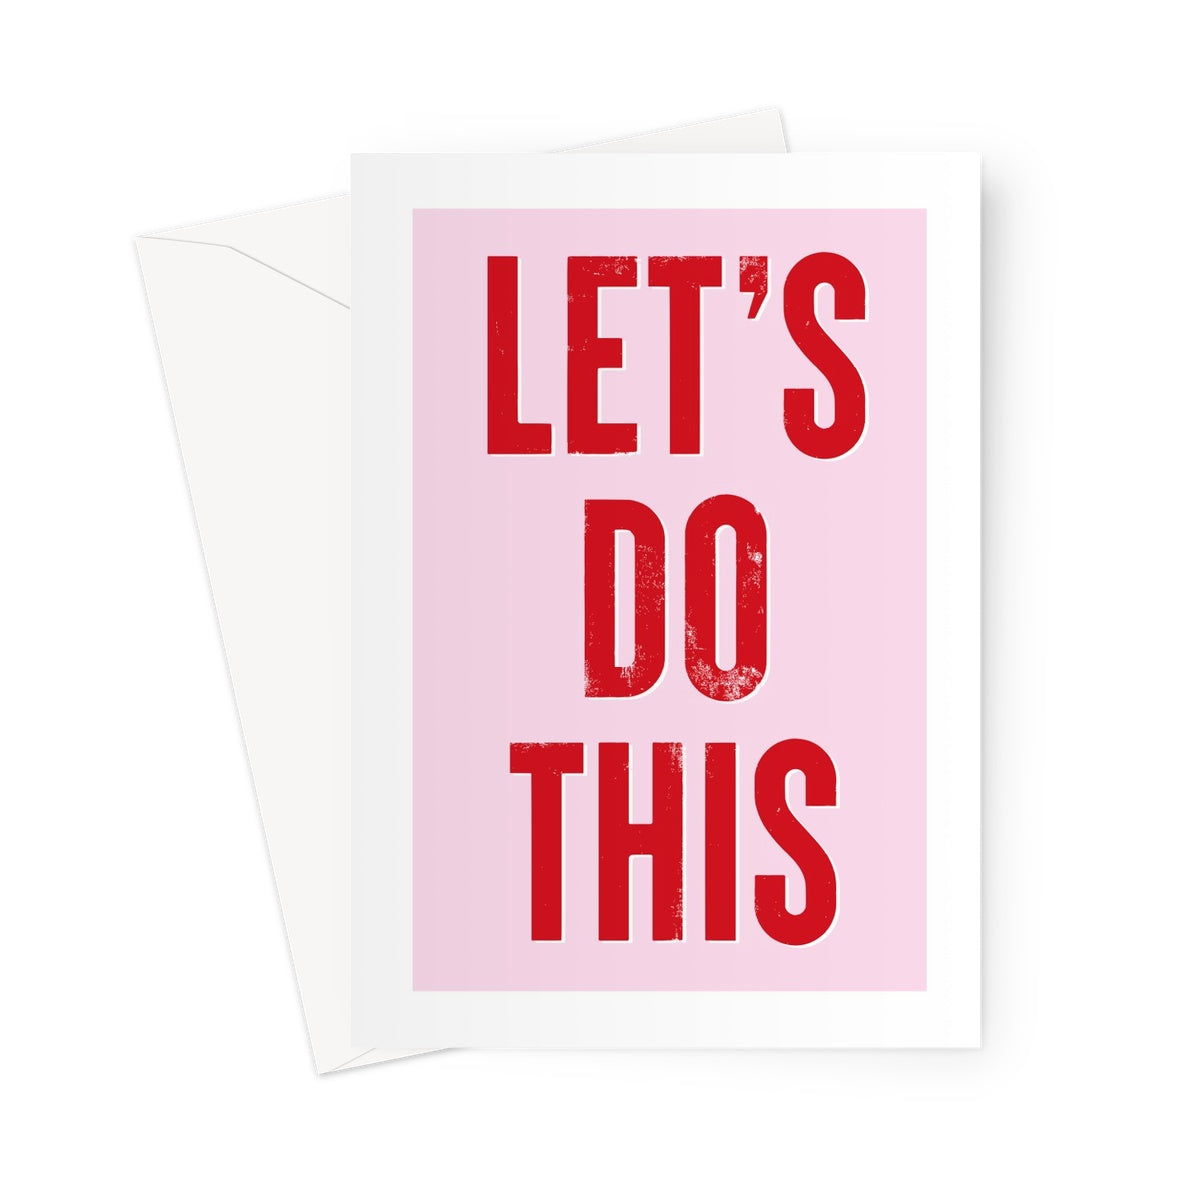 LETS DO THIS - Pink/Red Greeting Card